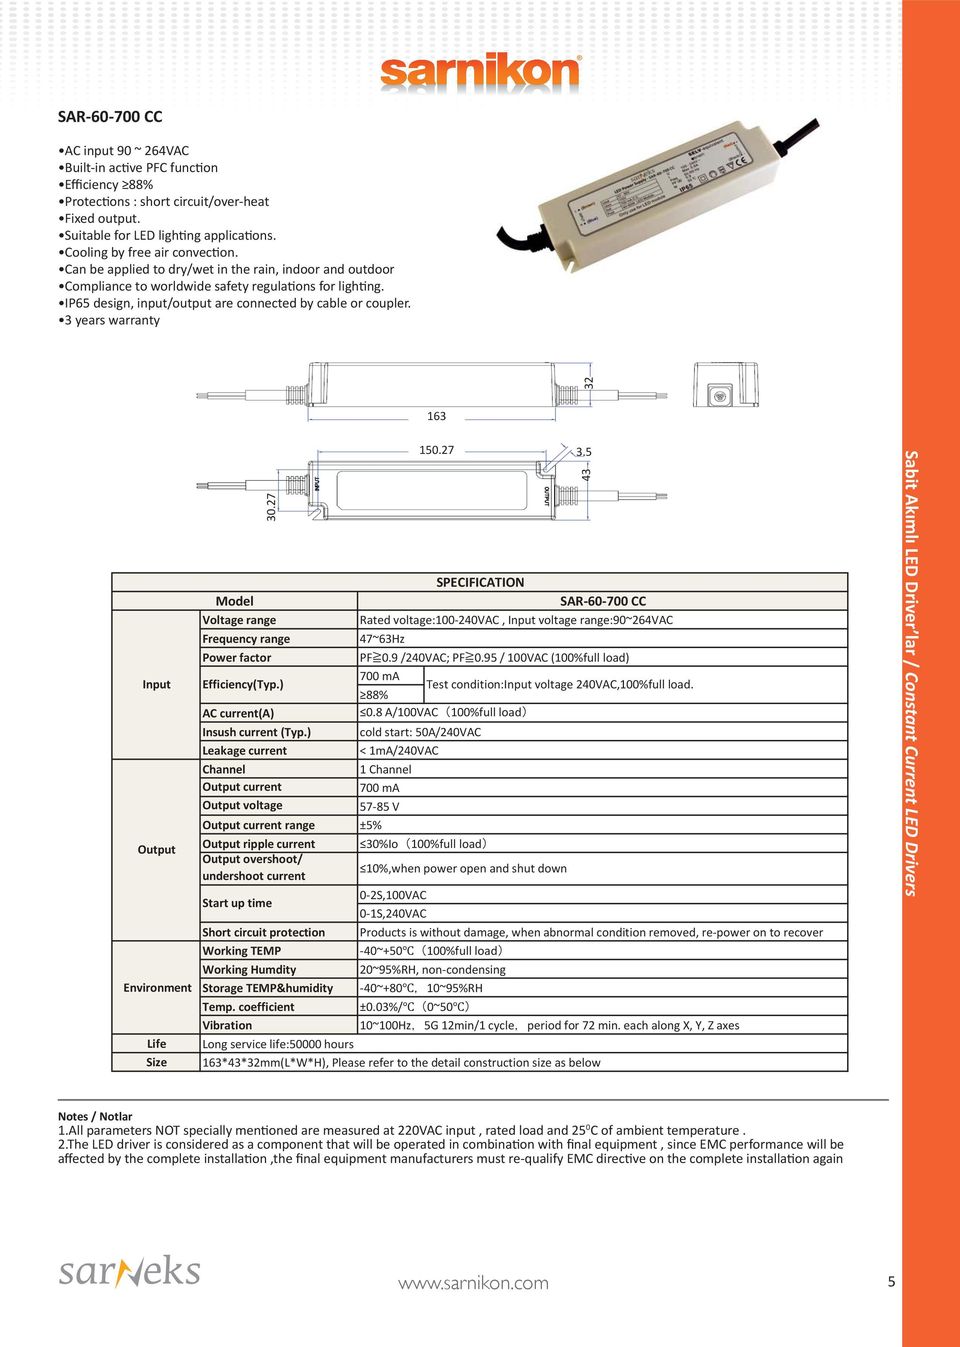 IP65 design, input/output are connected by cable or coupler. 3 years warranty 32 163 Input Output Environment Life Size 30.27 Model Voltage range Frequency range Power factor Efficiency(Typ.